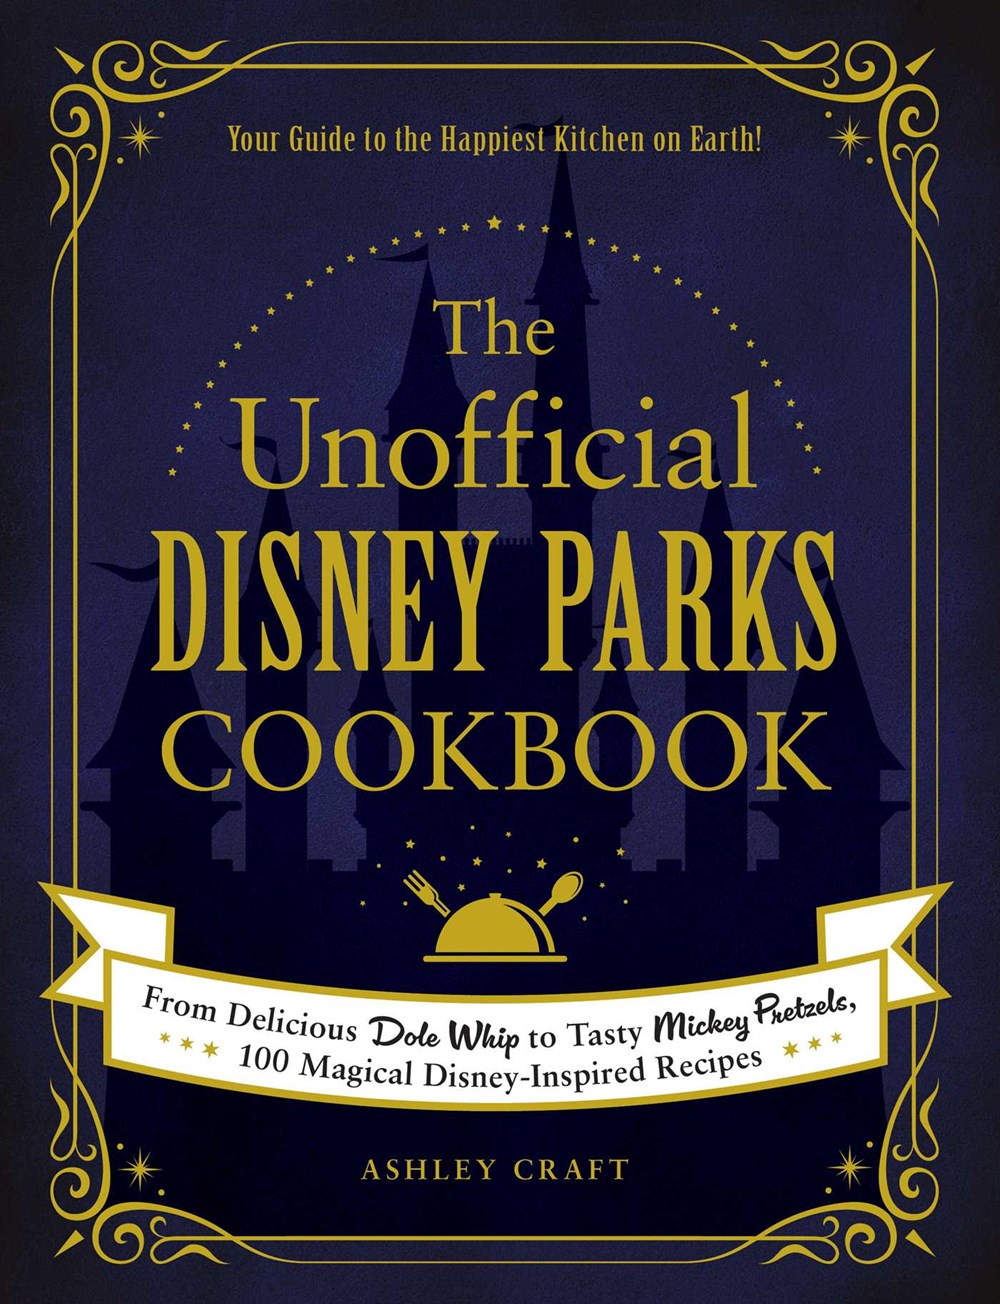 Review: The Unofficial Disney Parks Cookbook